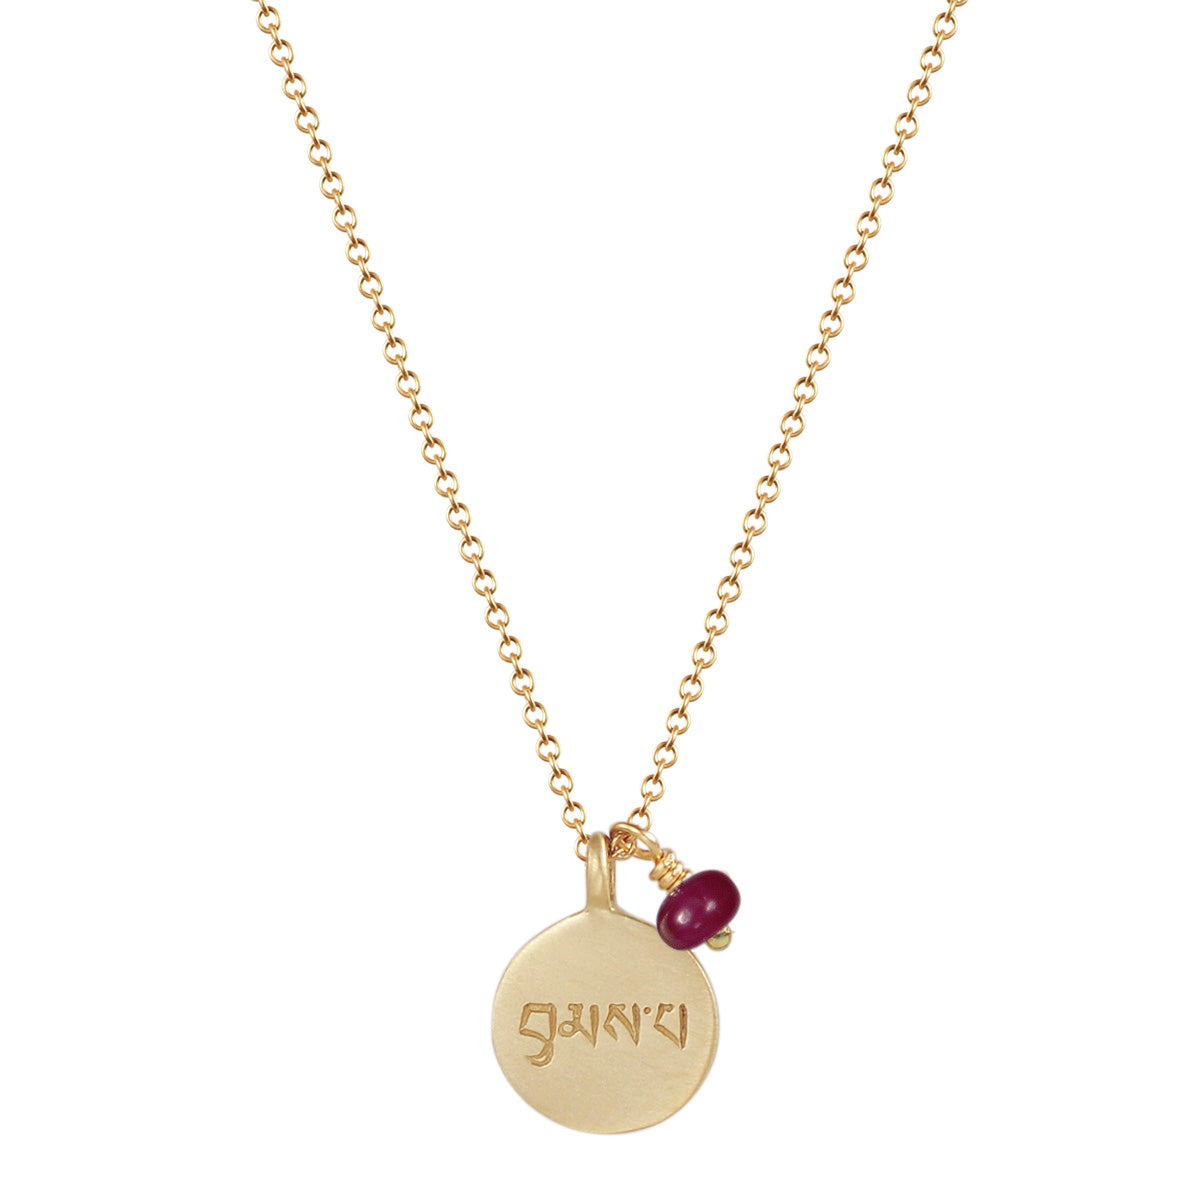 10K Gold Love Disc Pendant with Ruby